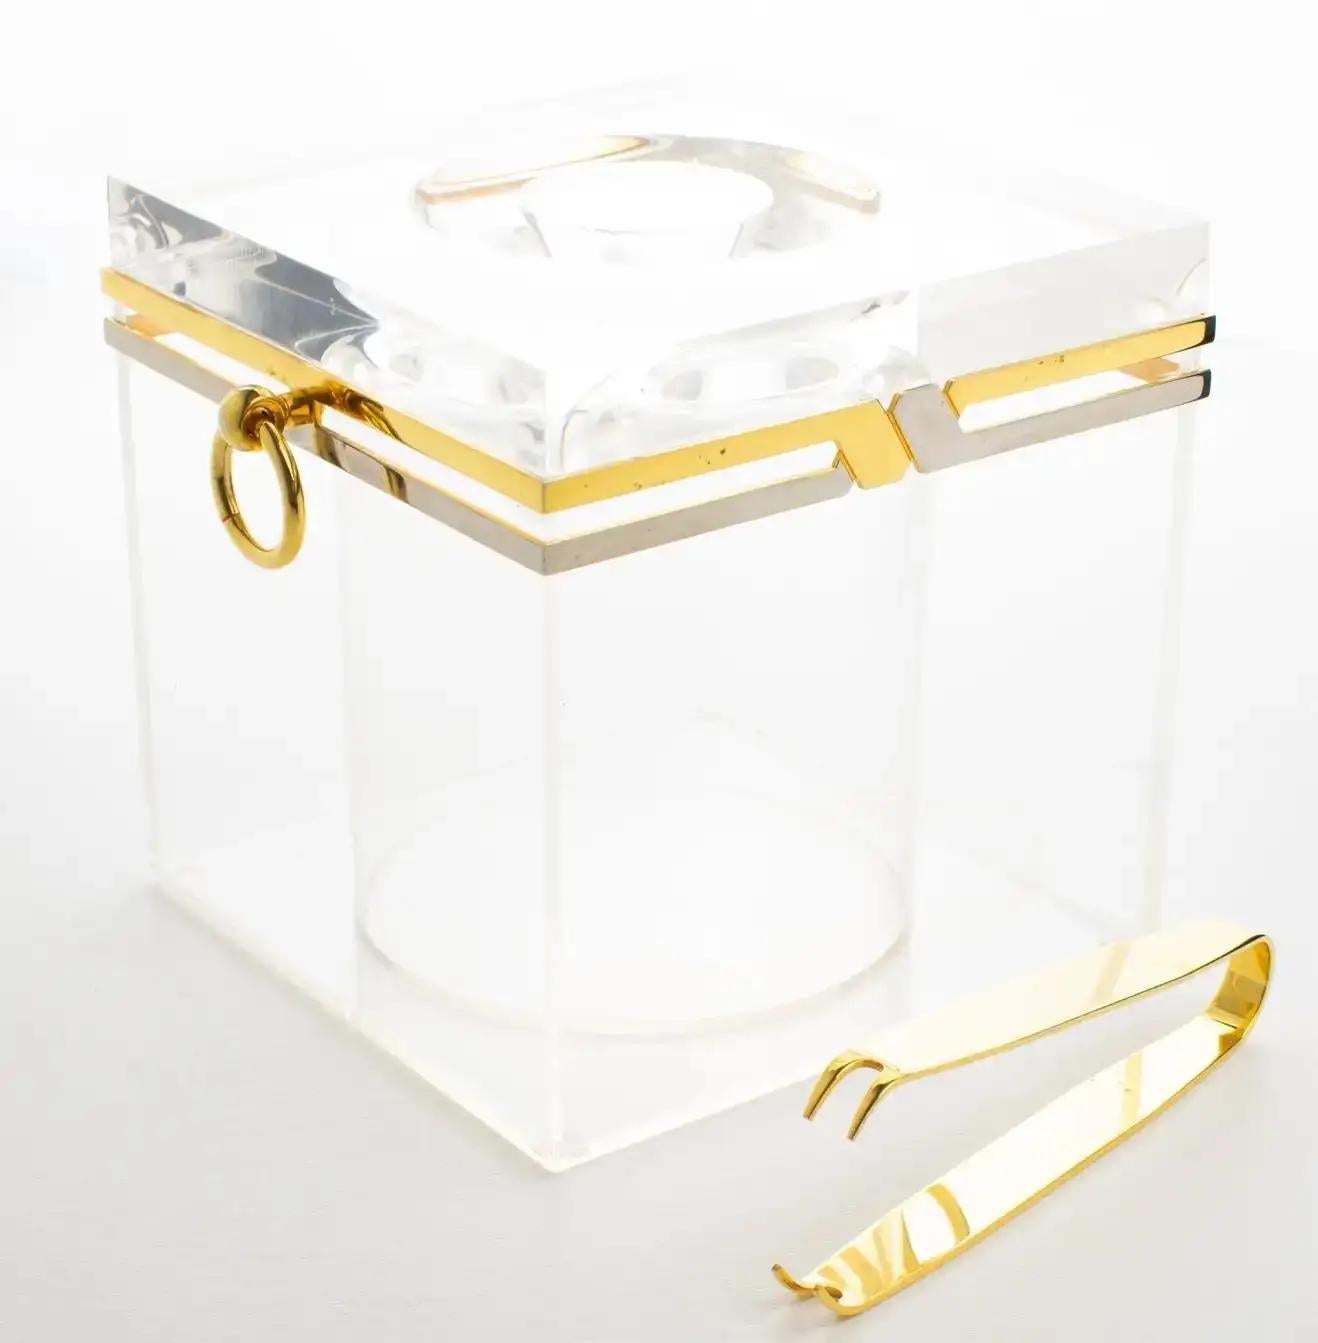 Late 20th Century Romeo Rega Modernist Chrome, Brass, and Lucite Barware Ice Bucket, 1970s For Sale